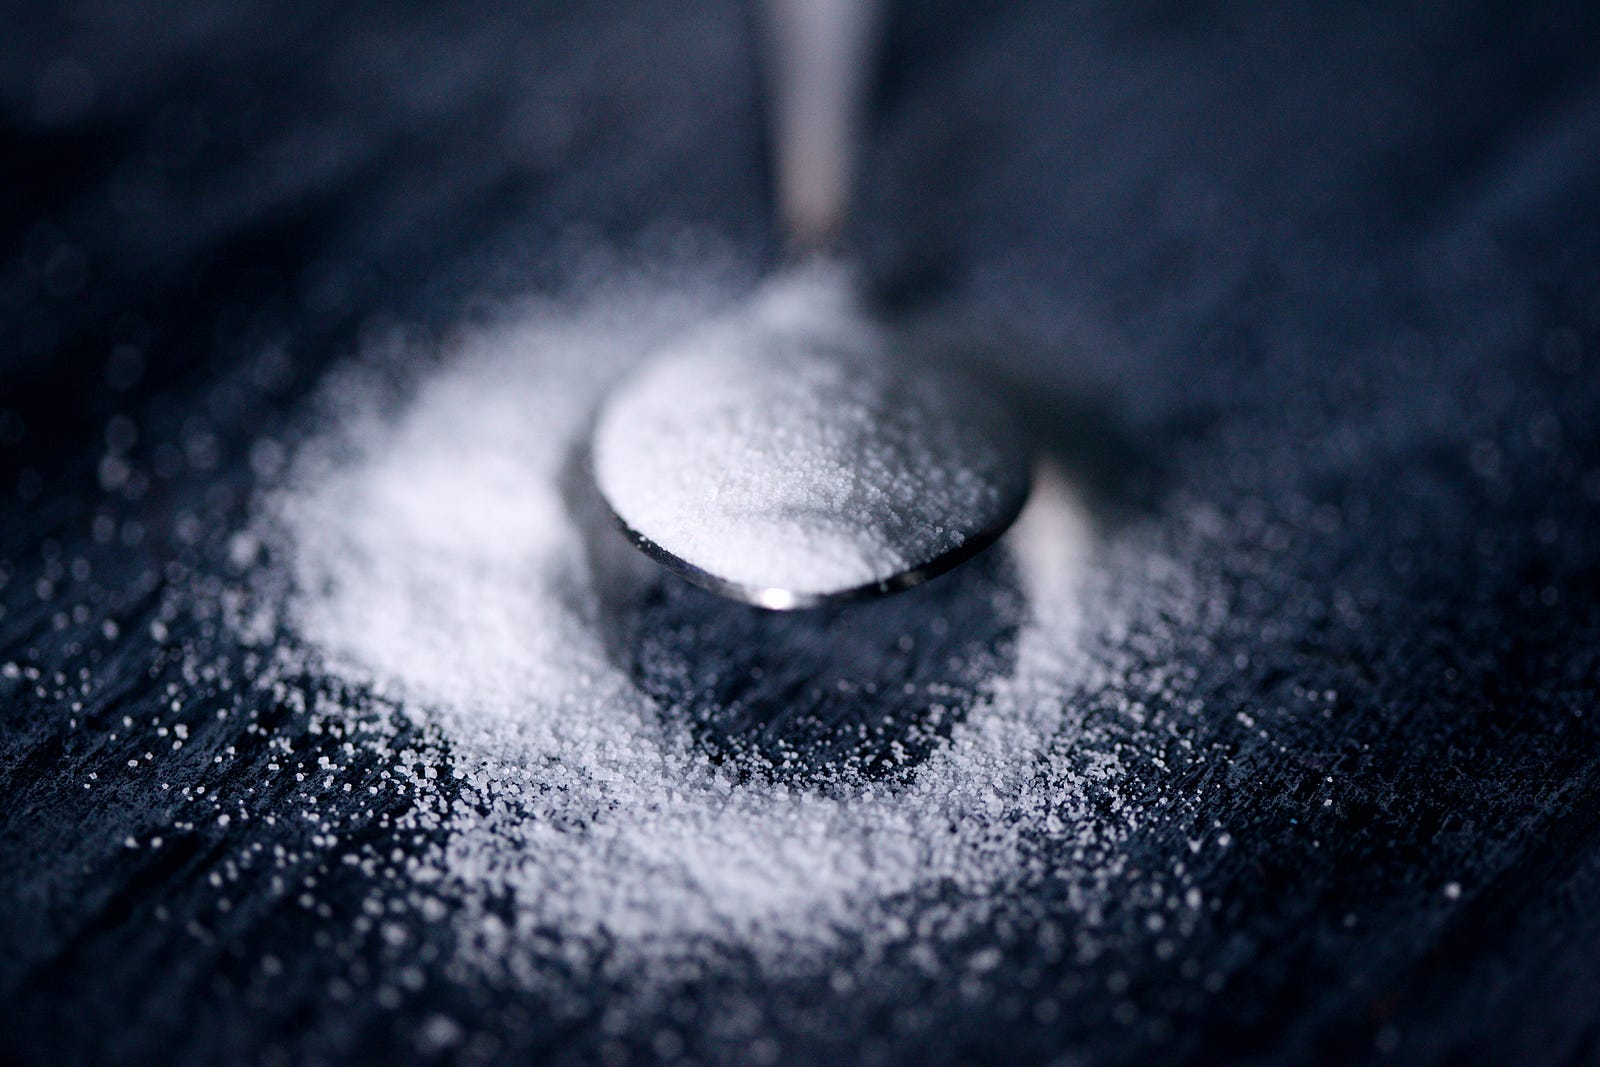 A narrow silver spoon emerges from the image top, holding sugar. More sugar is spilled onto the black surface below. Diets high in fat and sugar can cause metabolic imbalances and inflammation, disrupting the body’s natural sleep-wake cycle. Additionally, consuming these foods has been linked to increased arousal levels, making it more difficult to transition into and maintain deep sleep.